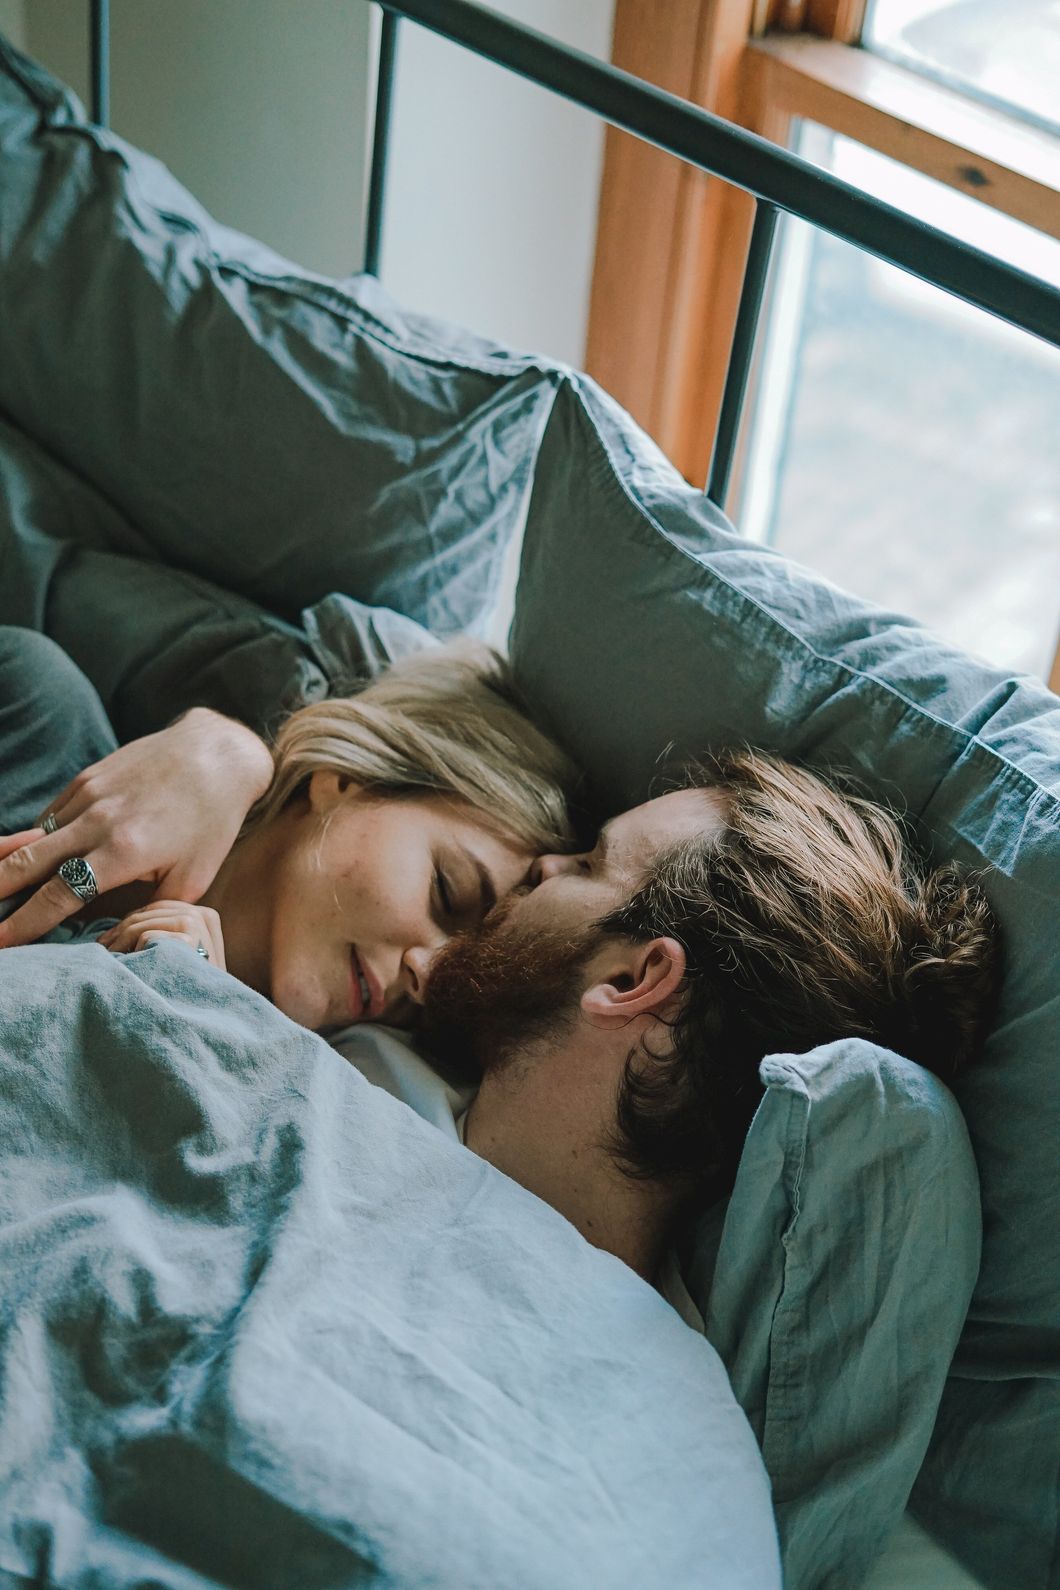 The Best Type Of Sex, According To 21 20-Somethings